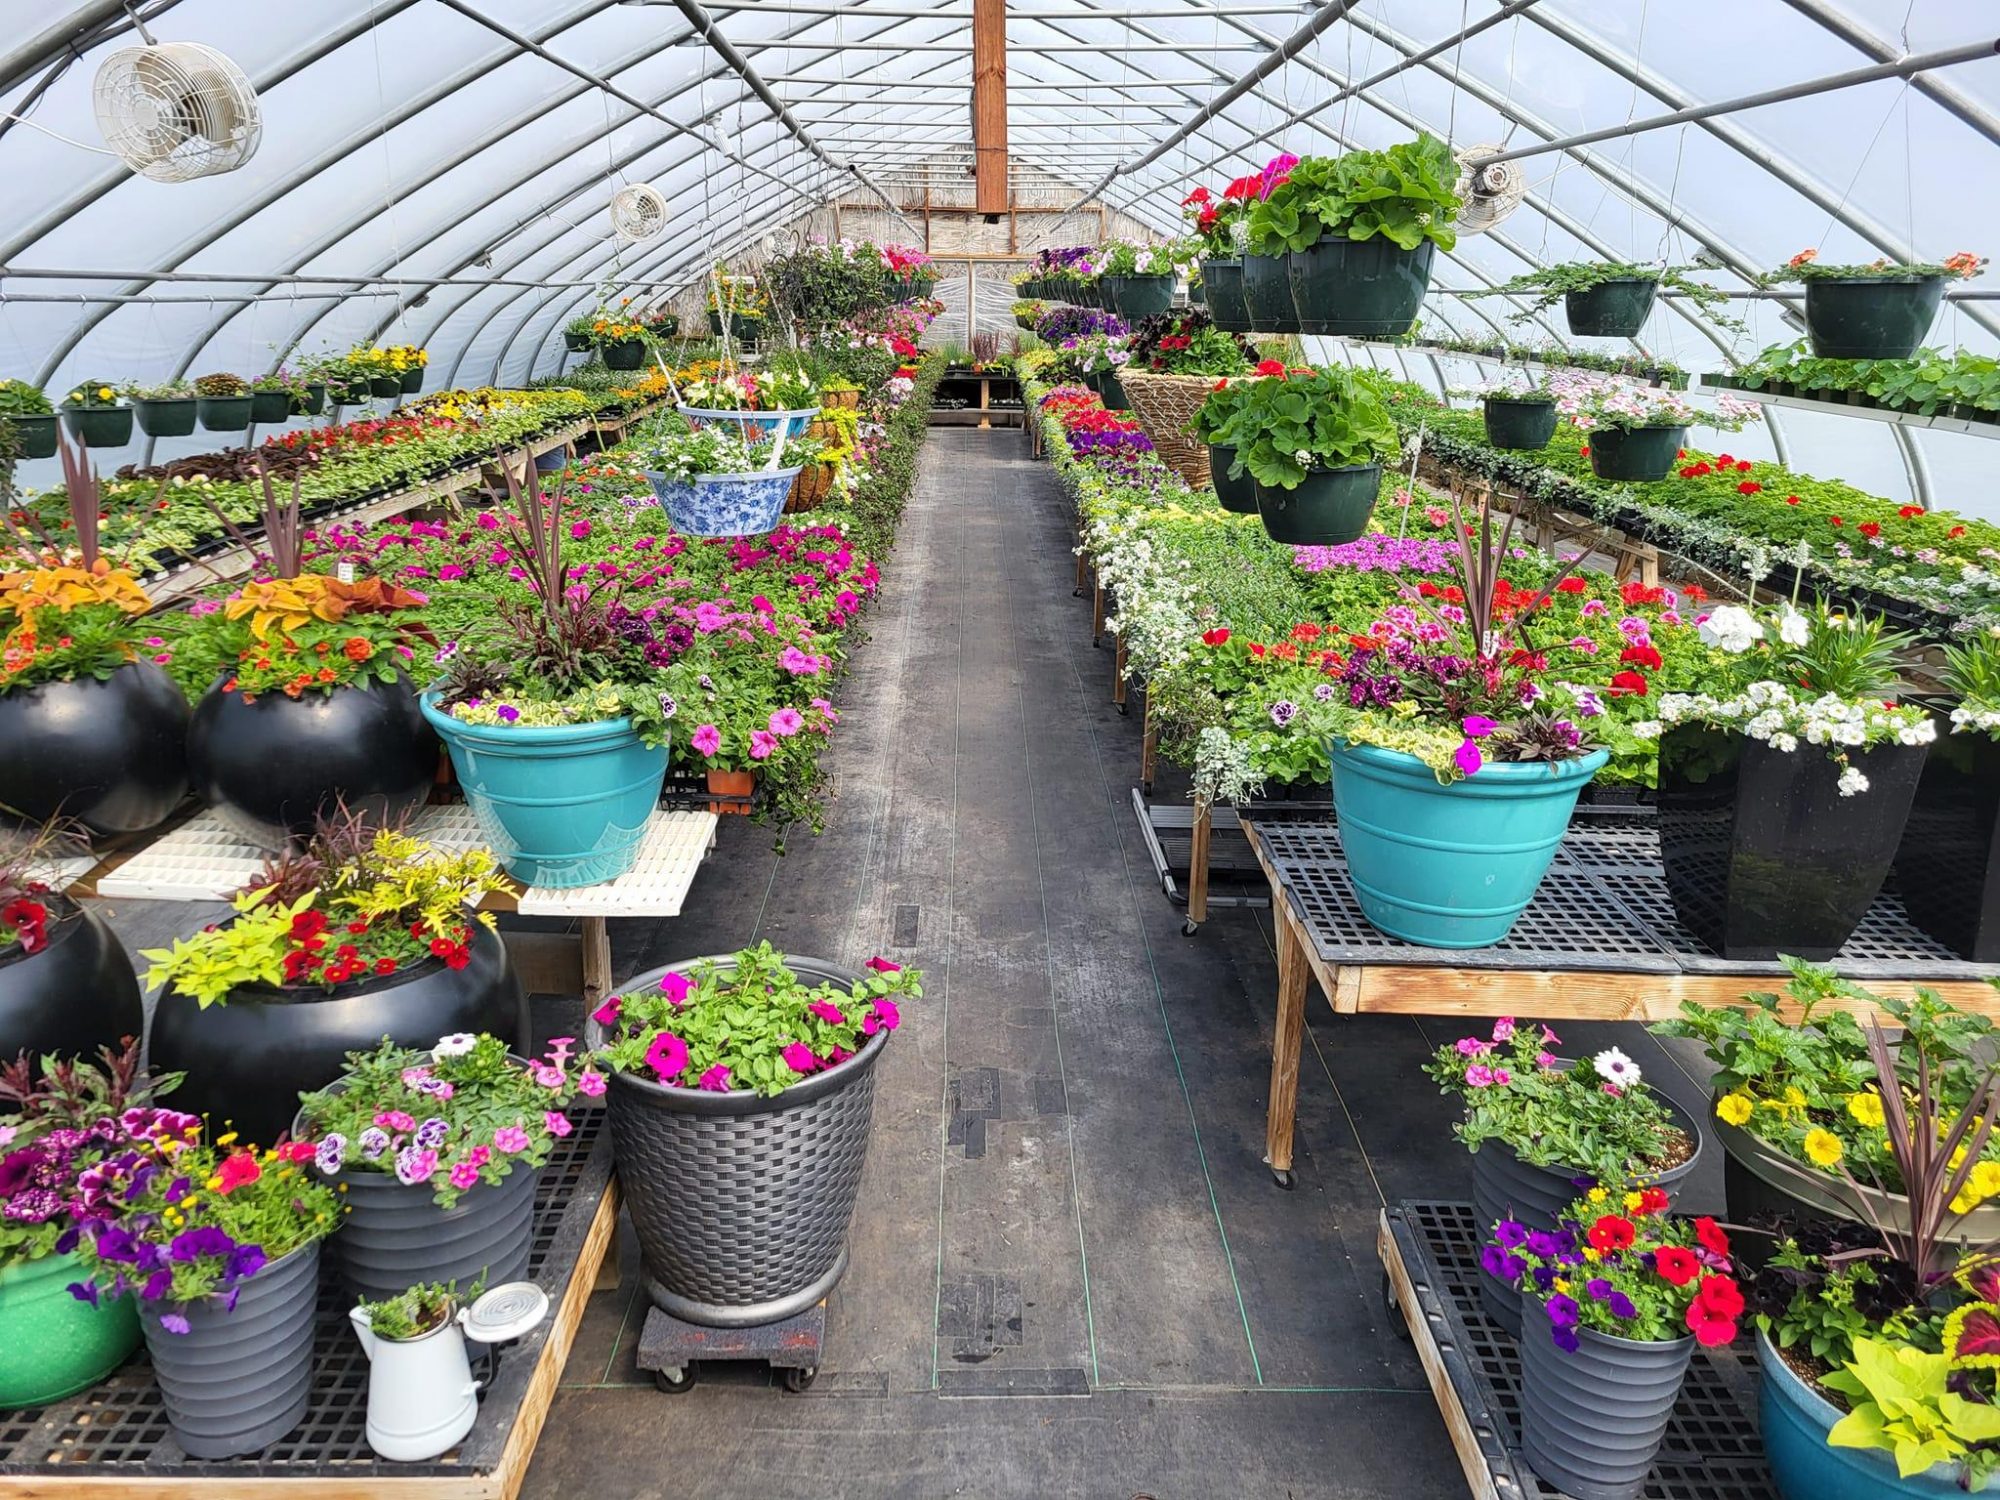 The Roni Daale & Company Greenhouse in Fairview, South Dakota.